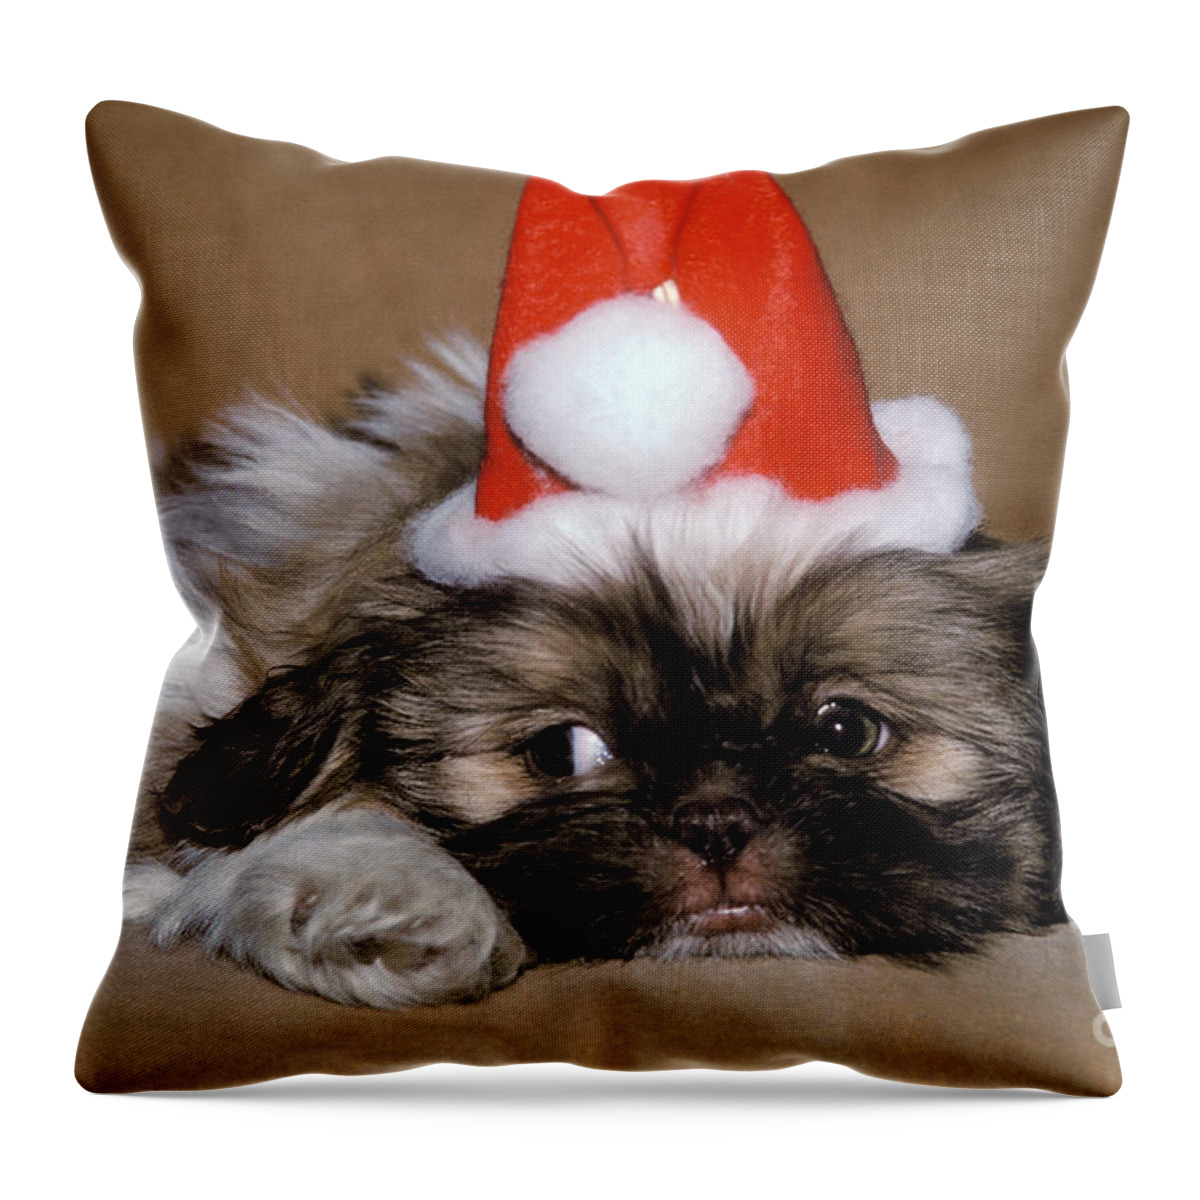 Animal Throw Pillow featuring the photograph Shih Tzu Dressed As Santa Claus by Ron Sanford